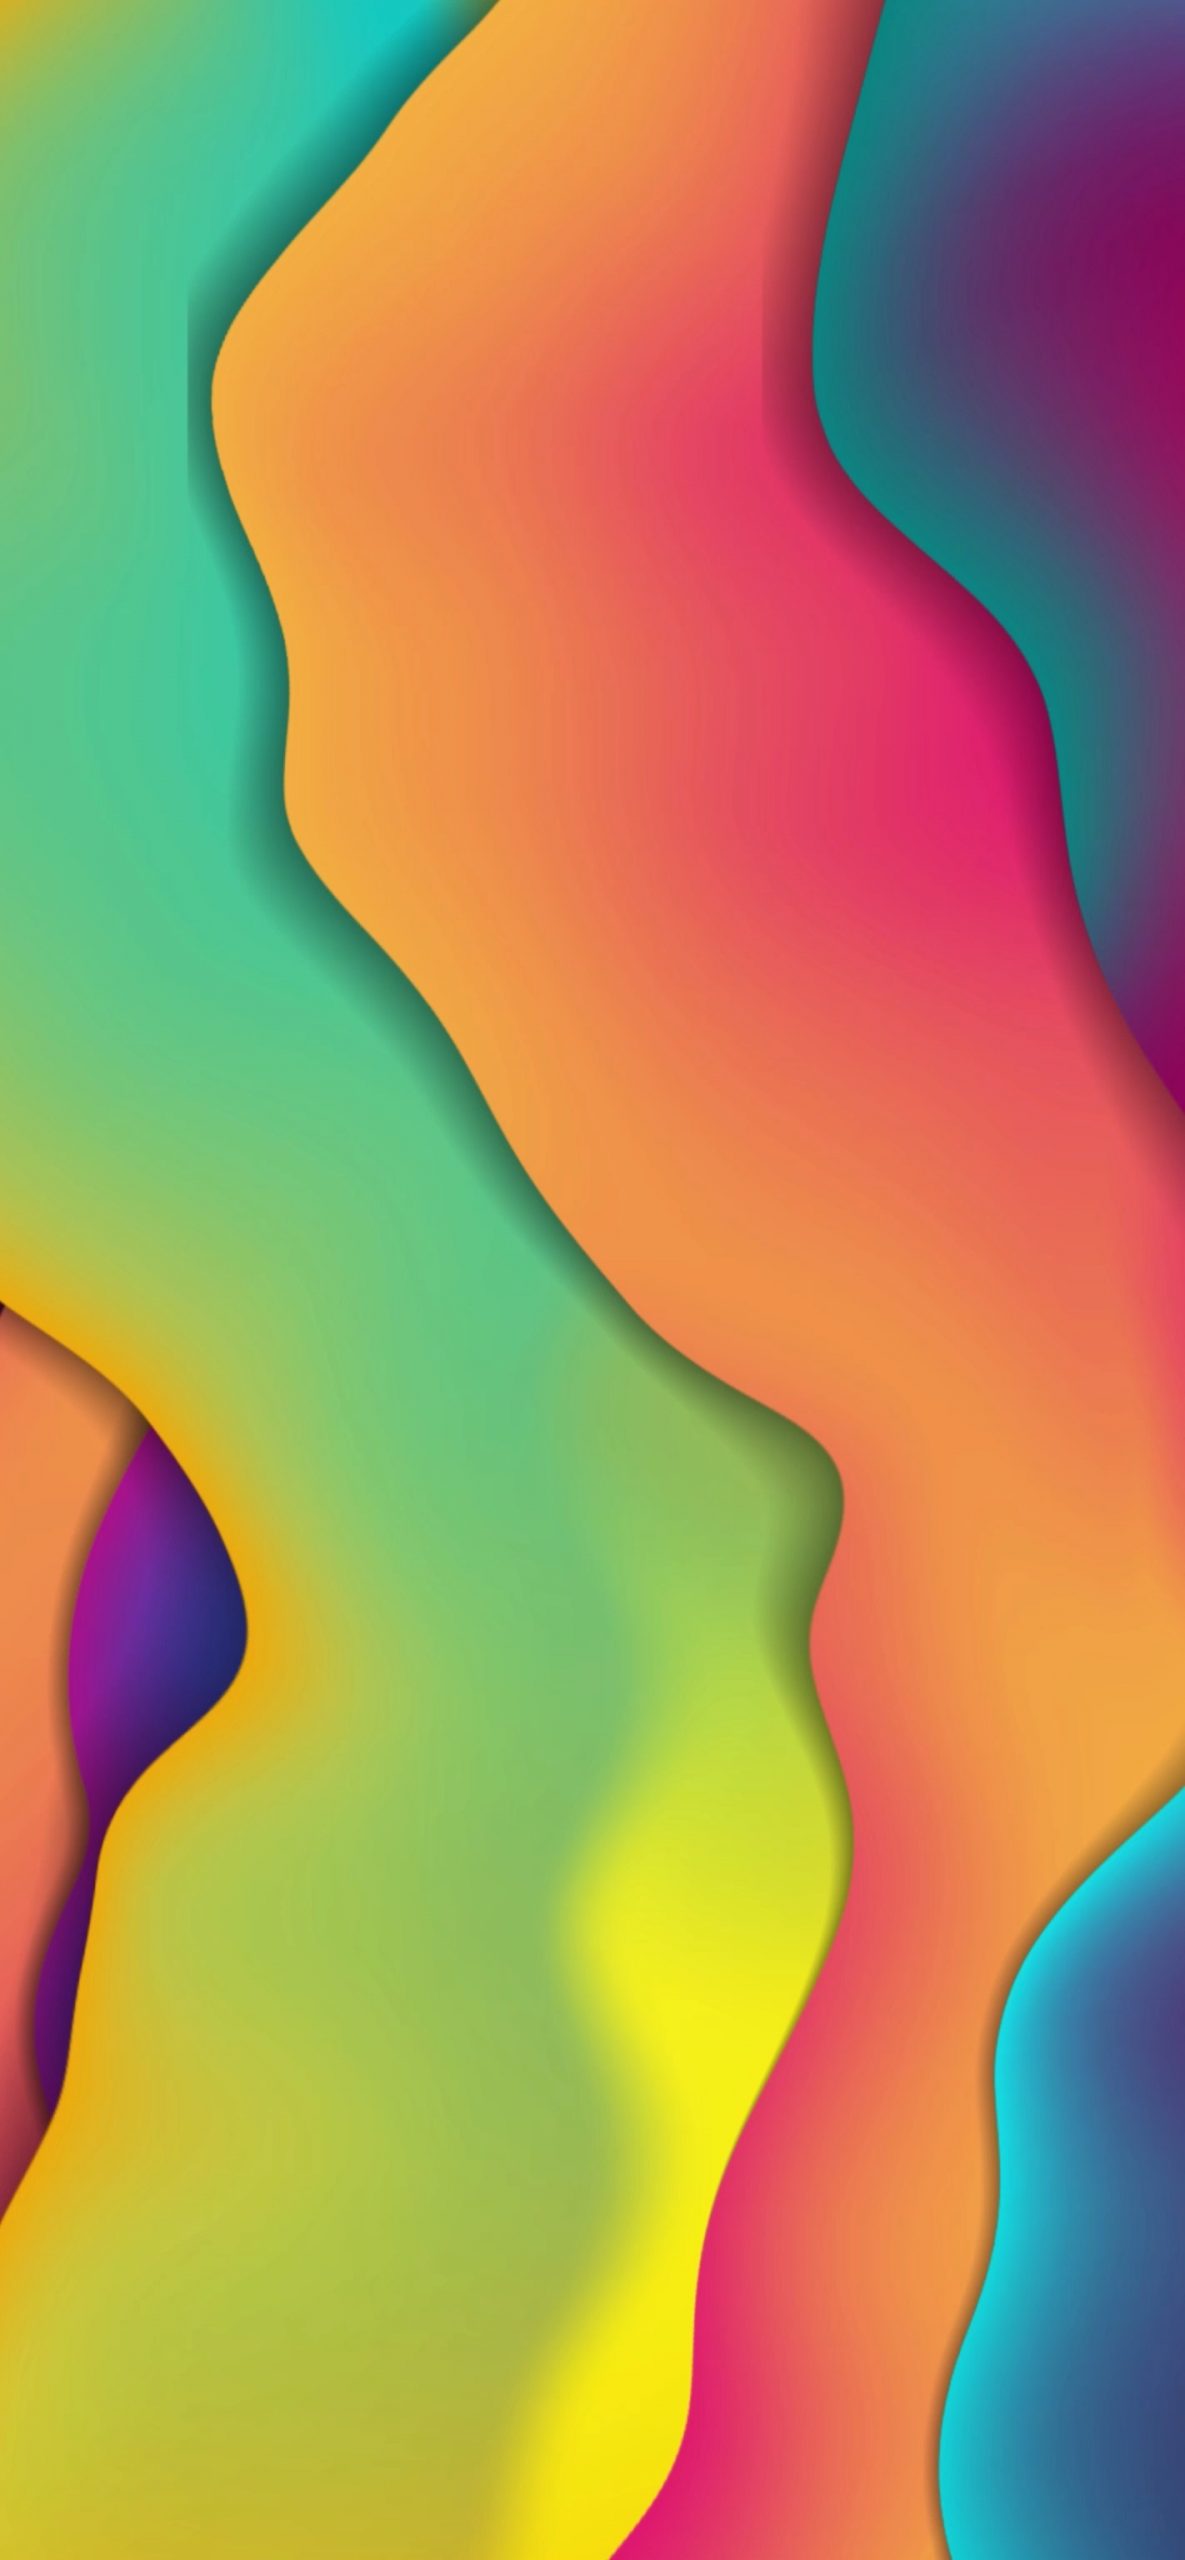 Fluid Rainbow Colors | Live Wallpaper - Wallpapers Central